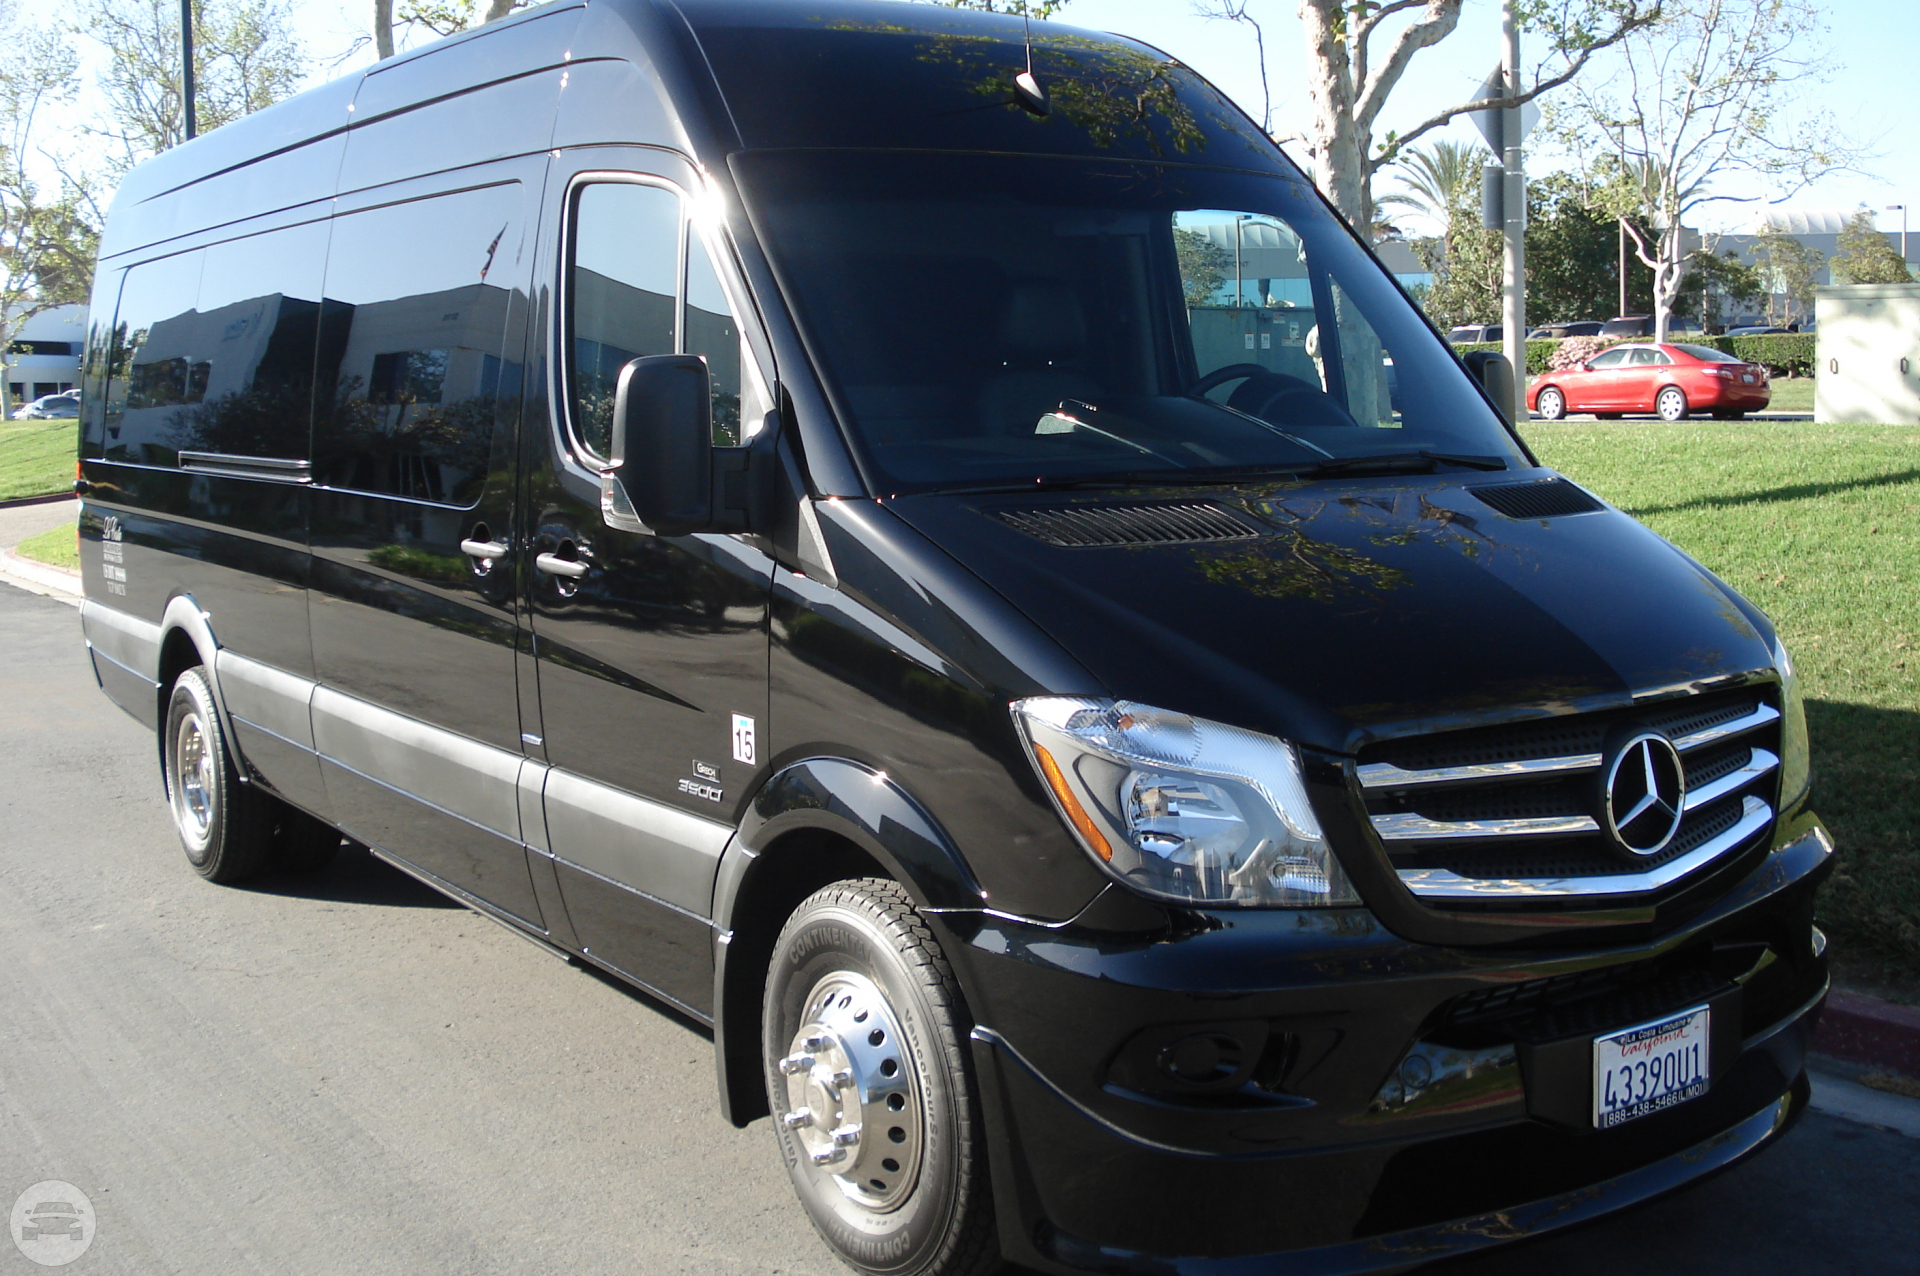 Mercedes Sprinter Limo
Party Limo Bus /
San Diego, CA

 / Hourly $0.00
